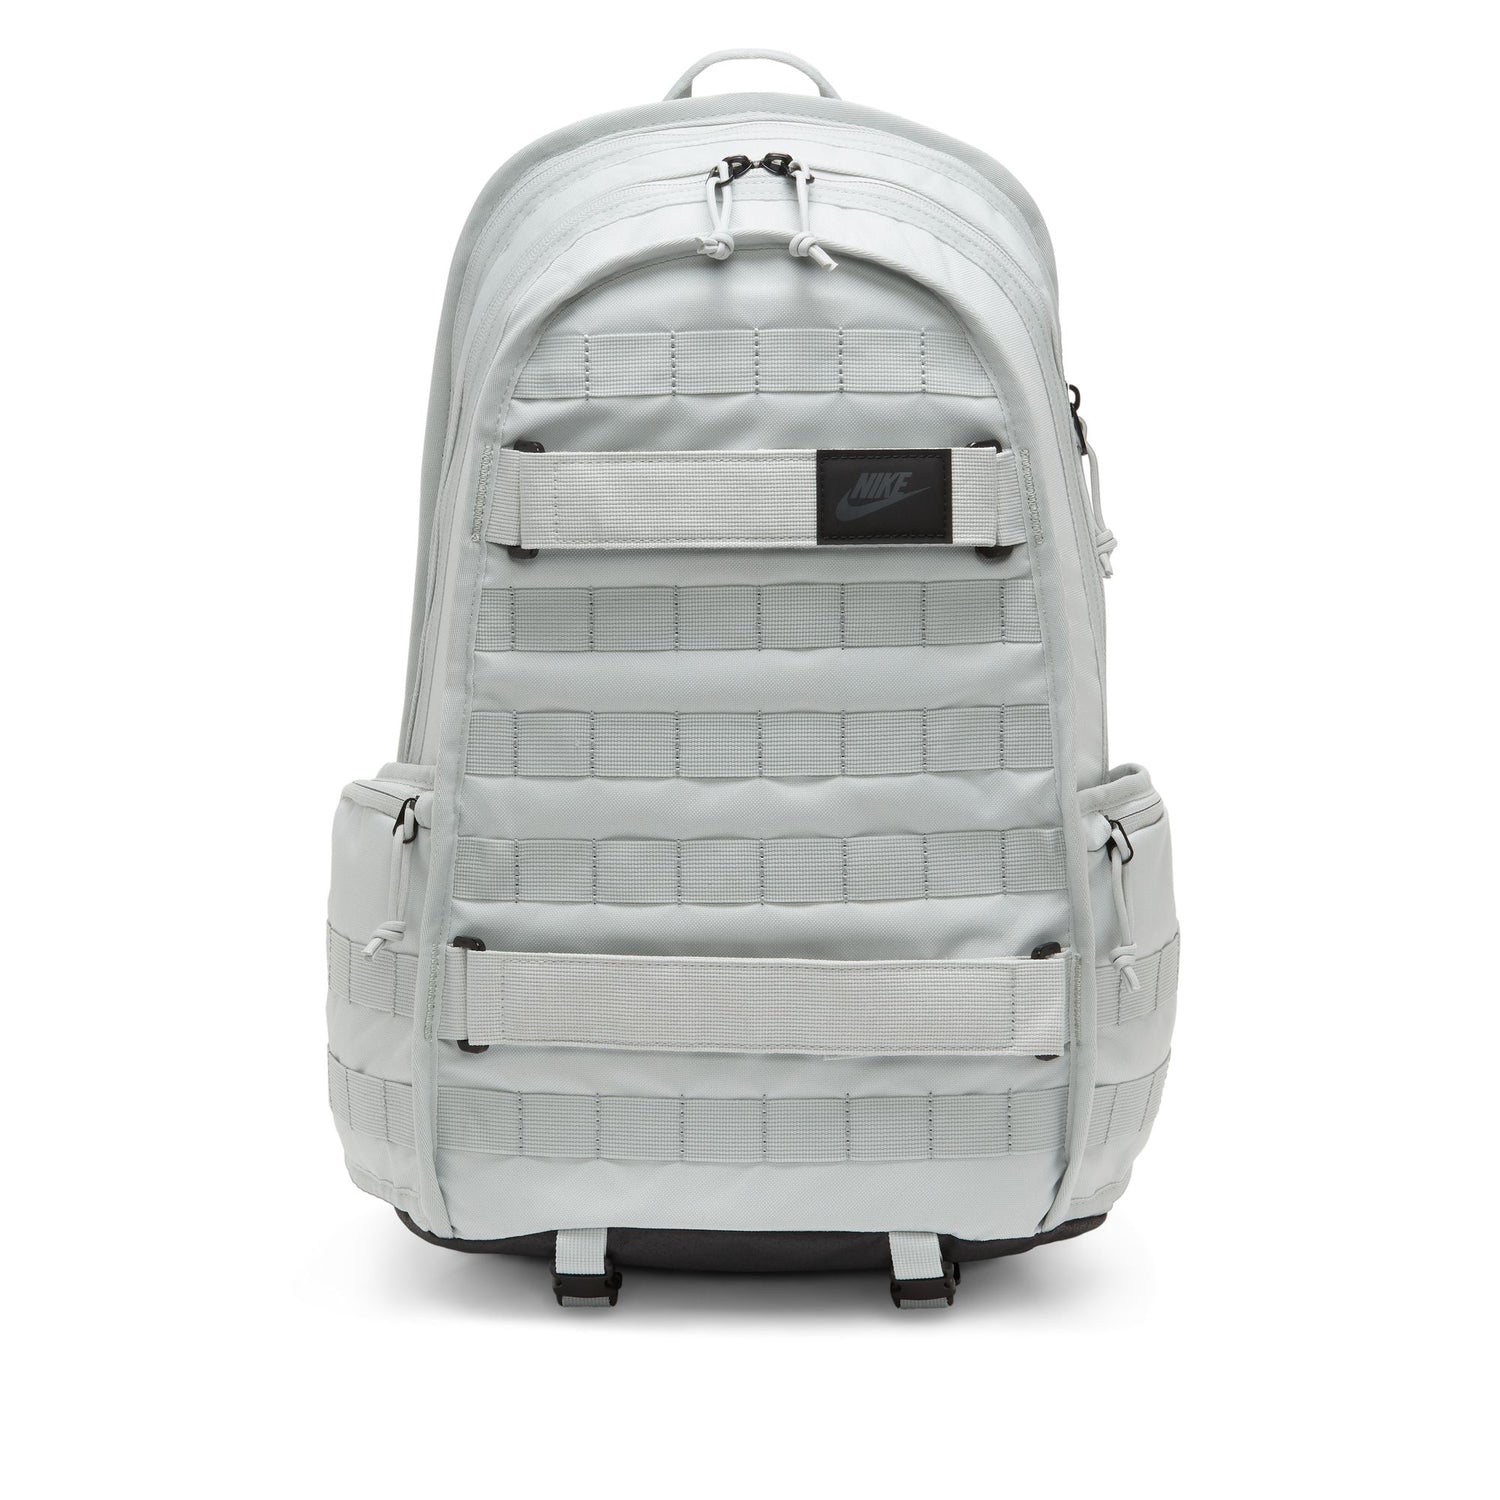 RPM BACKPACK LIGHT SILVER / BLACK / ANTHRACITE